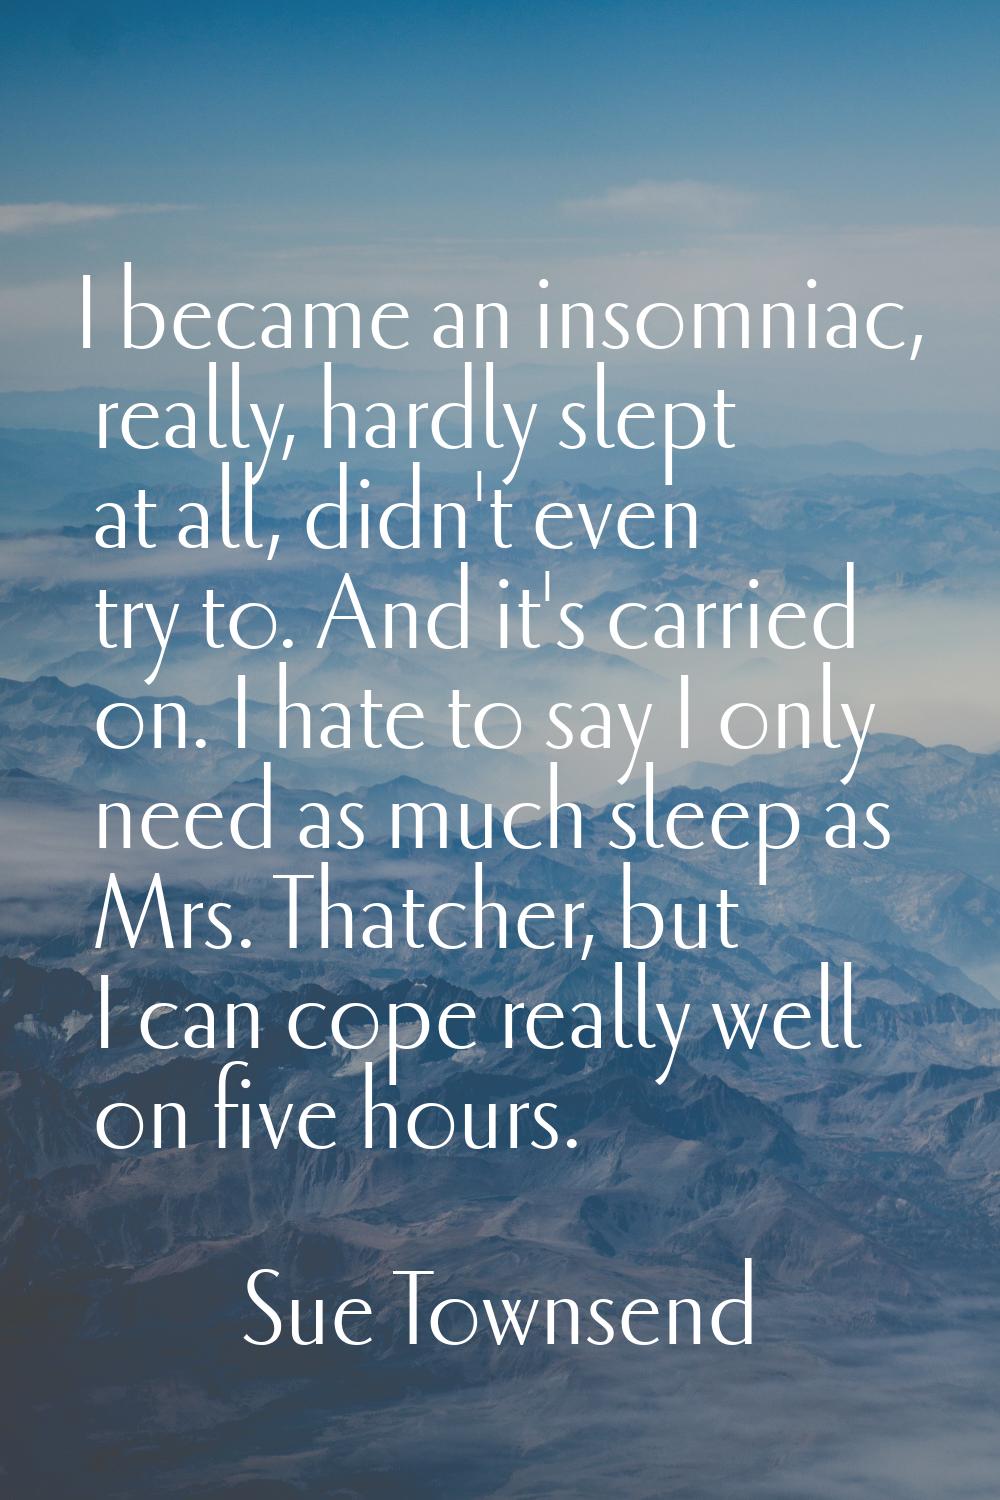 I became an insomniac, really, hardly slept at all, didn't even try to. And it's carried on. I hate